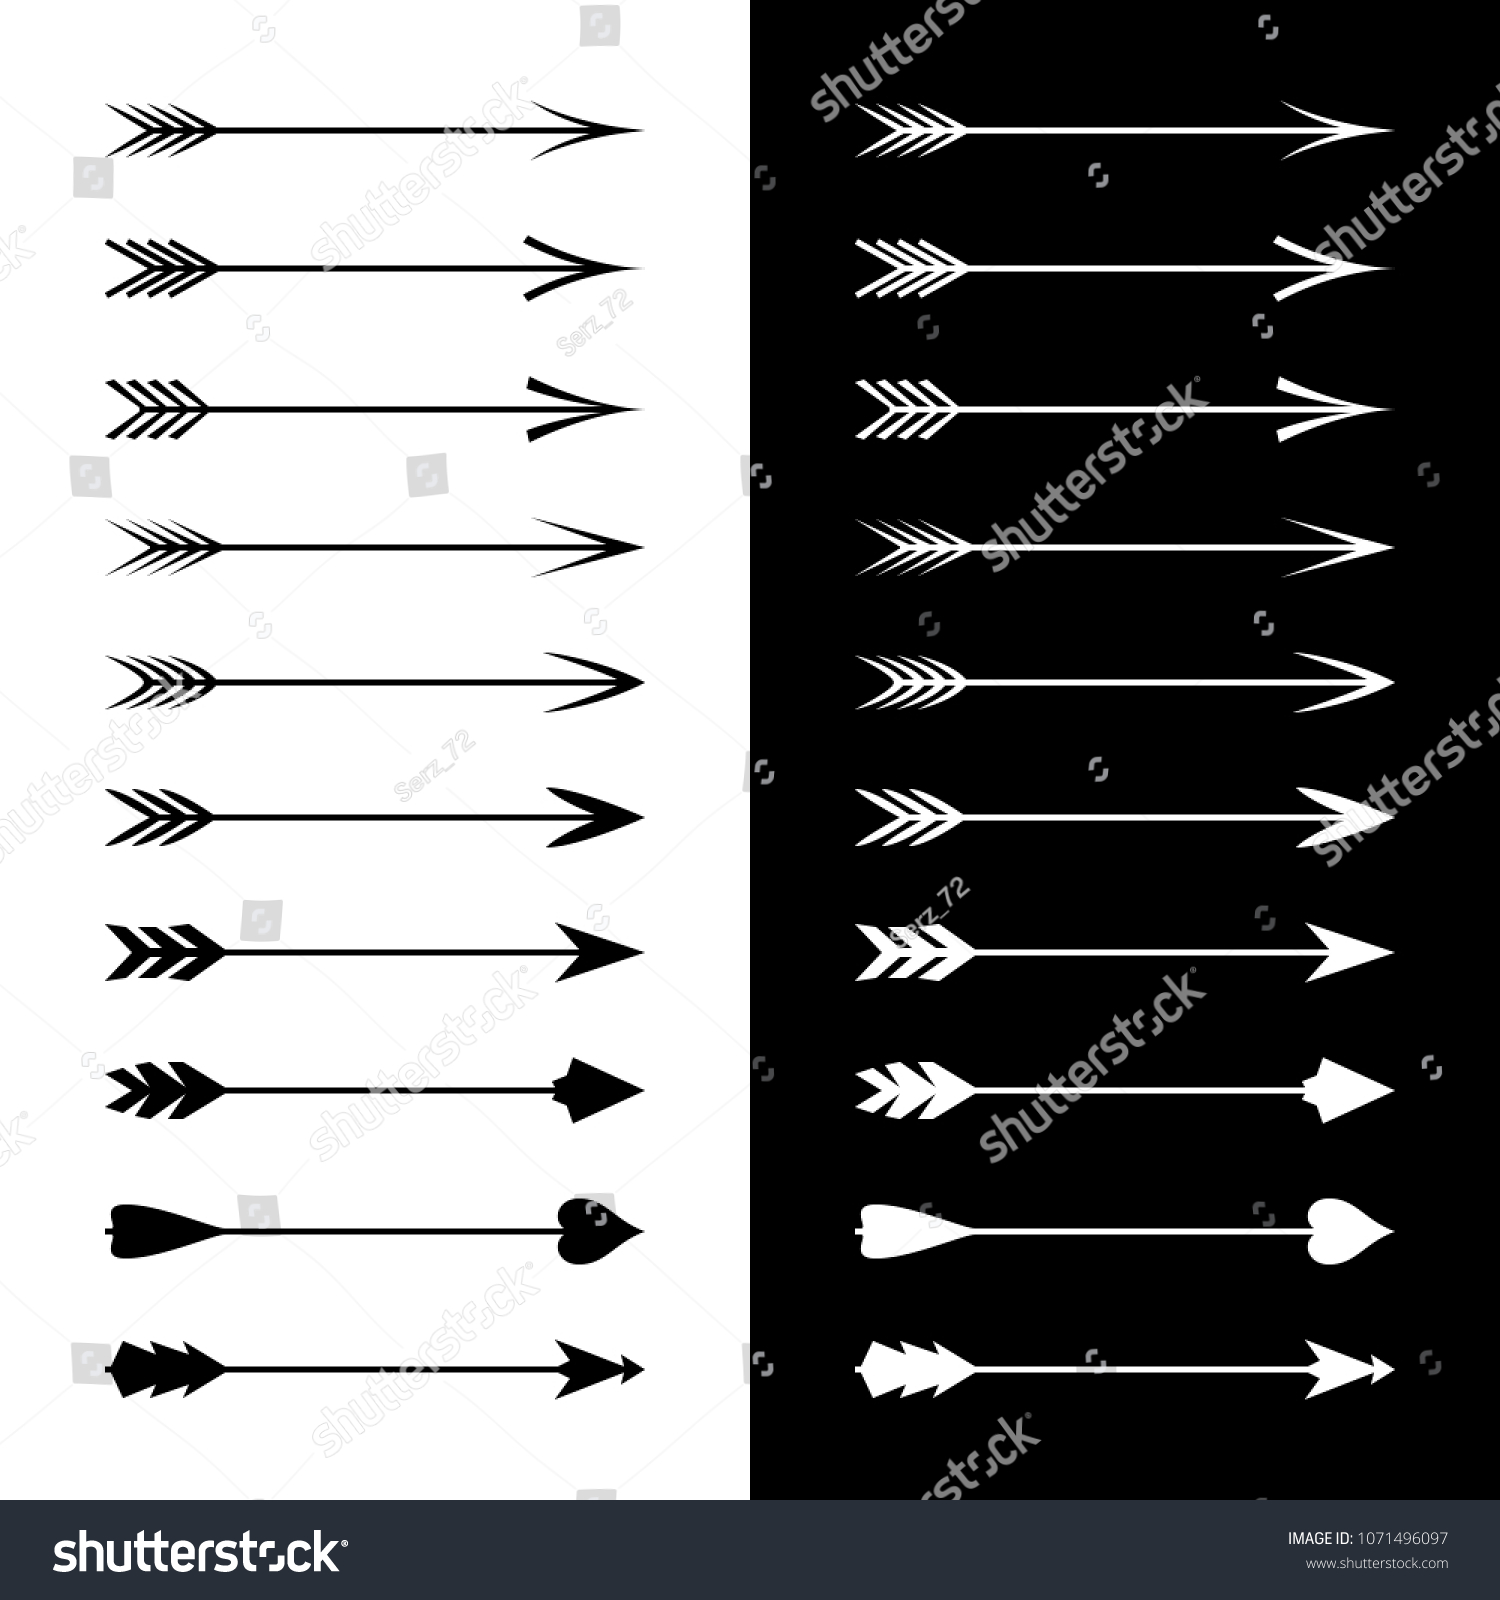 Set of Arrows on White and Black Background, Vector Illustration #1071496097